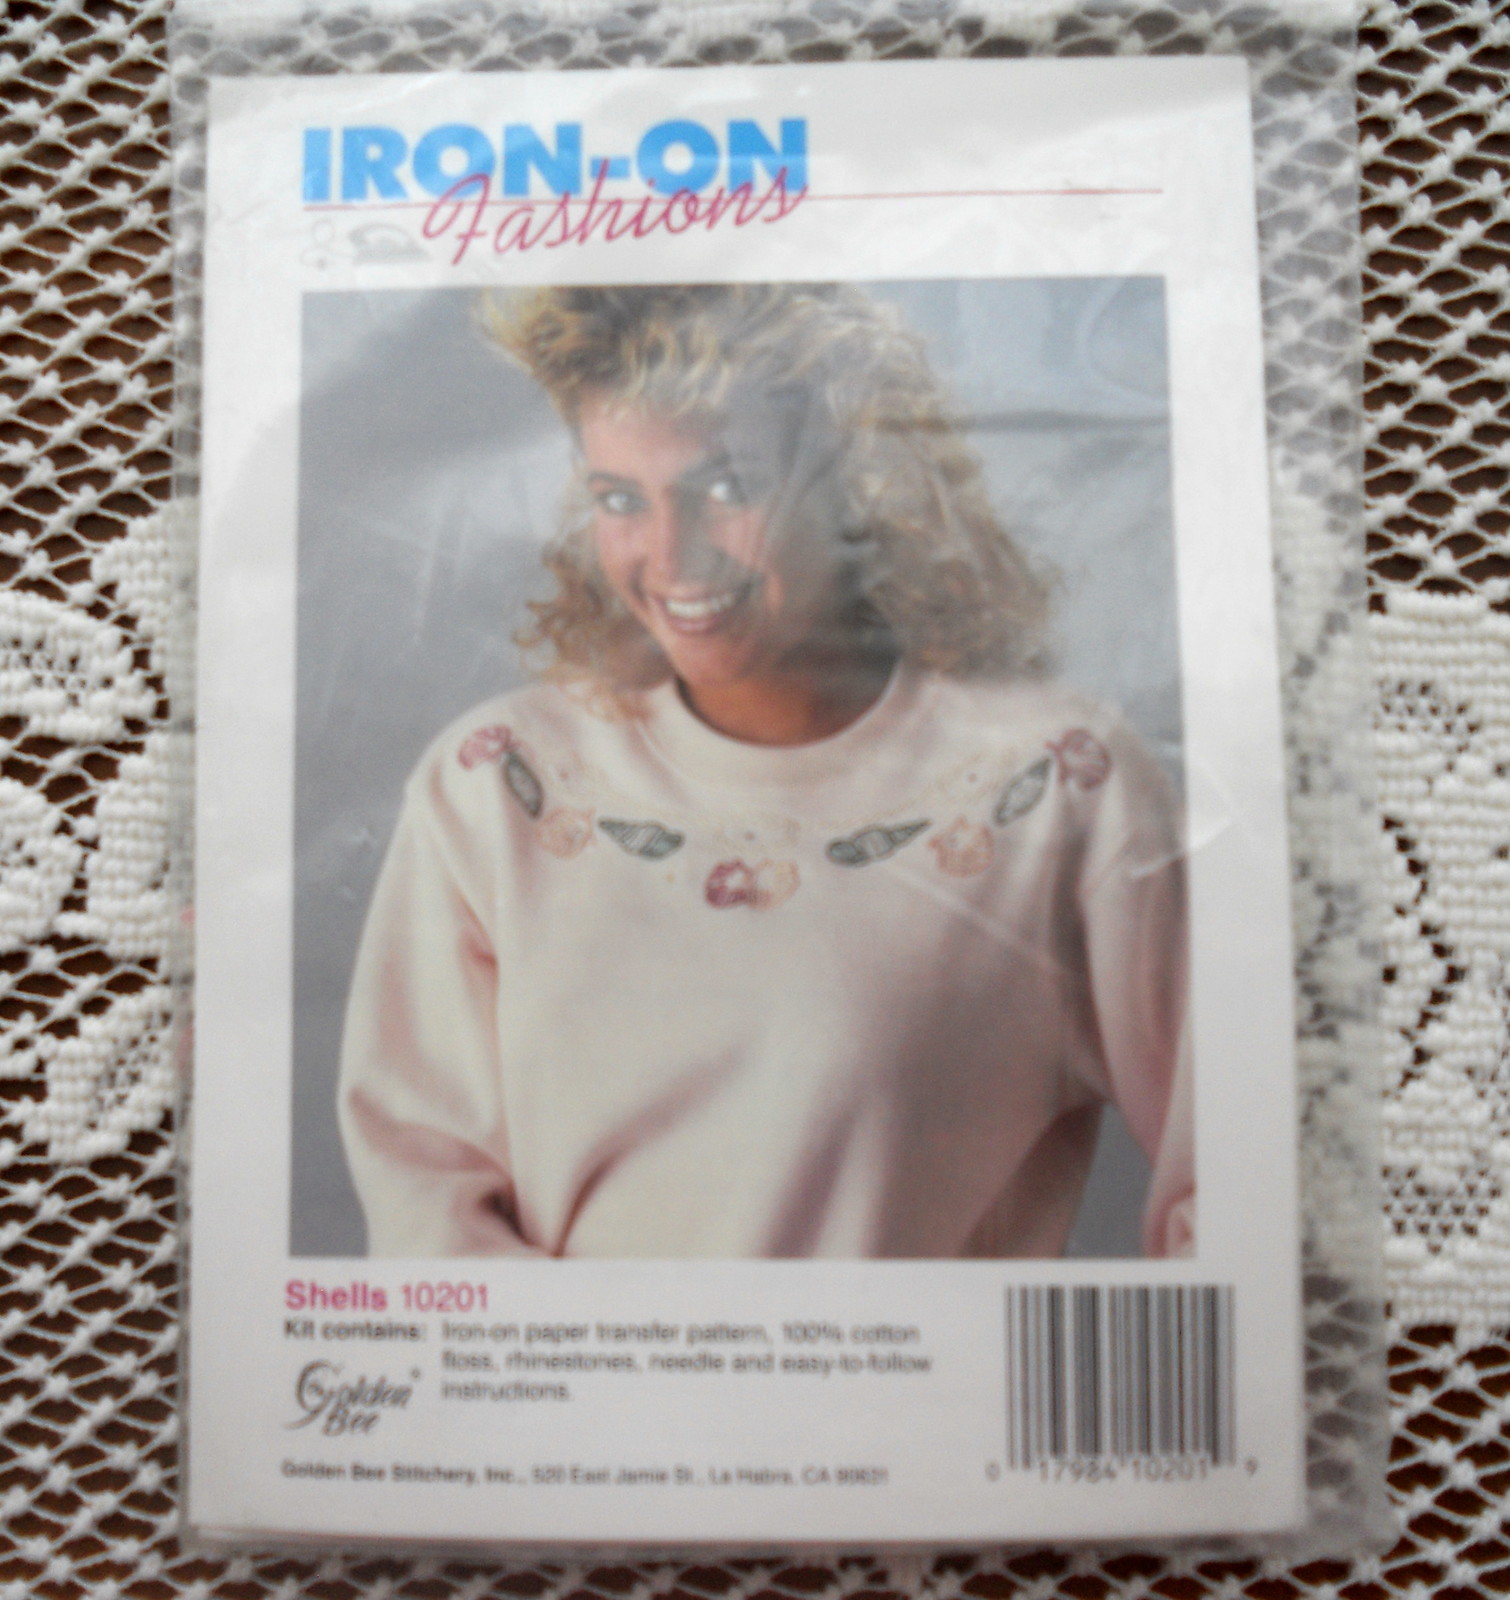 Golden Bee Iron On Fashions Shells Embroidery Kit No. 10201 - Shells Embroidery - $11.99